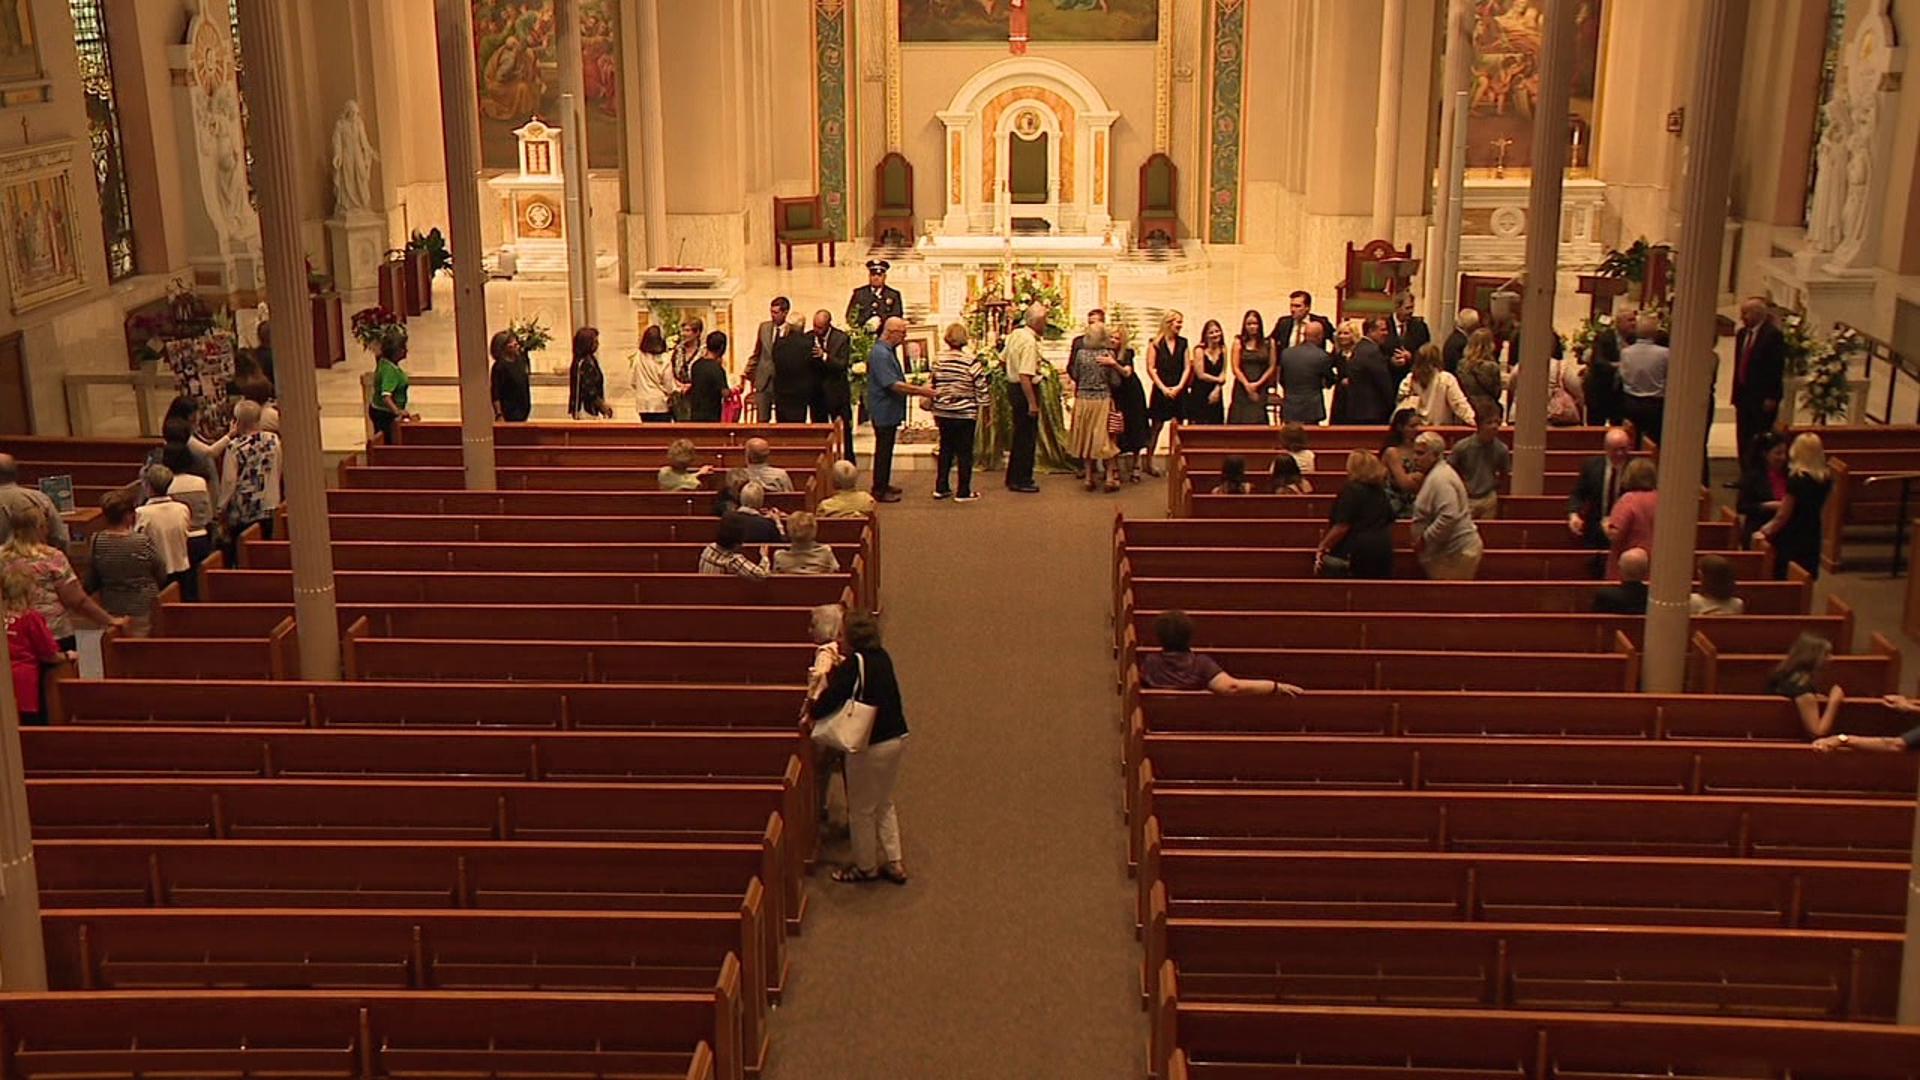 Hundreds gathered at St. Peter's Cathedral in downtown Scranton to honor the former mayor.